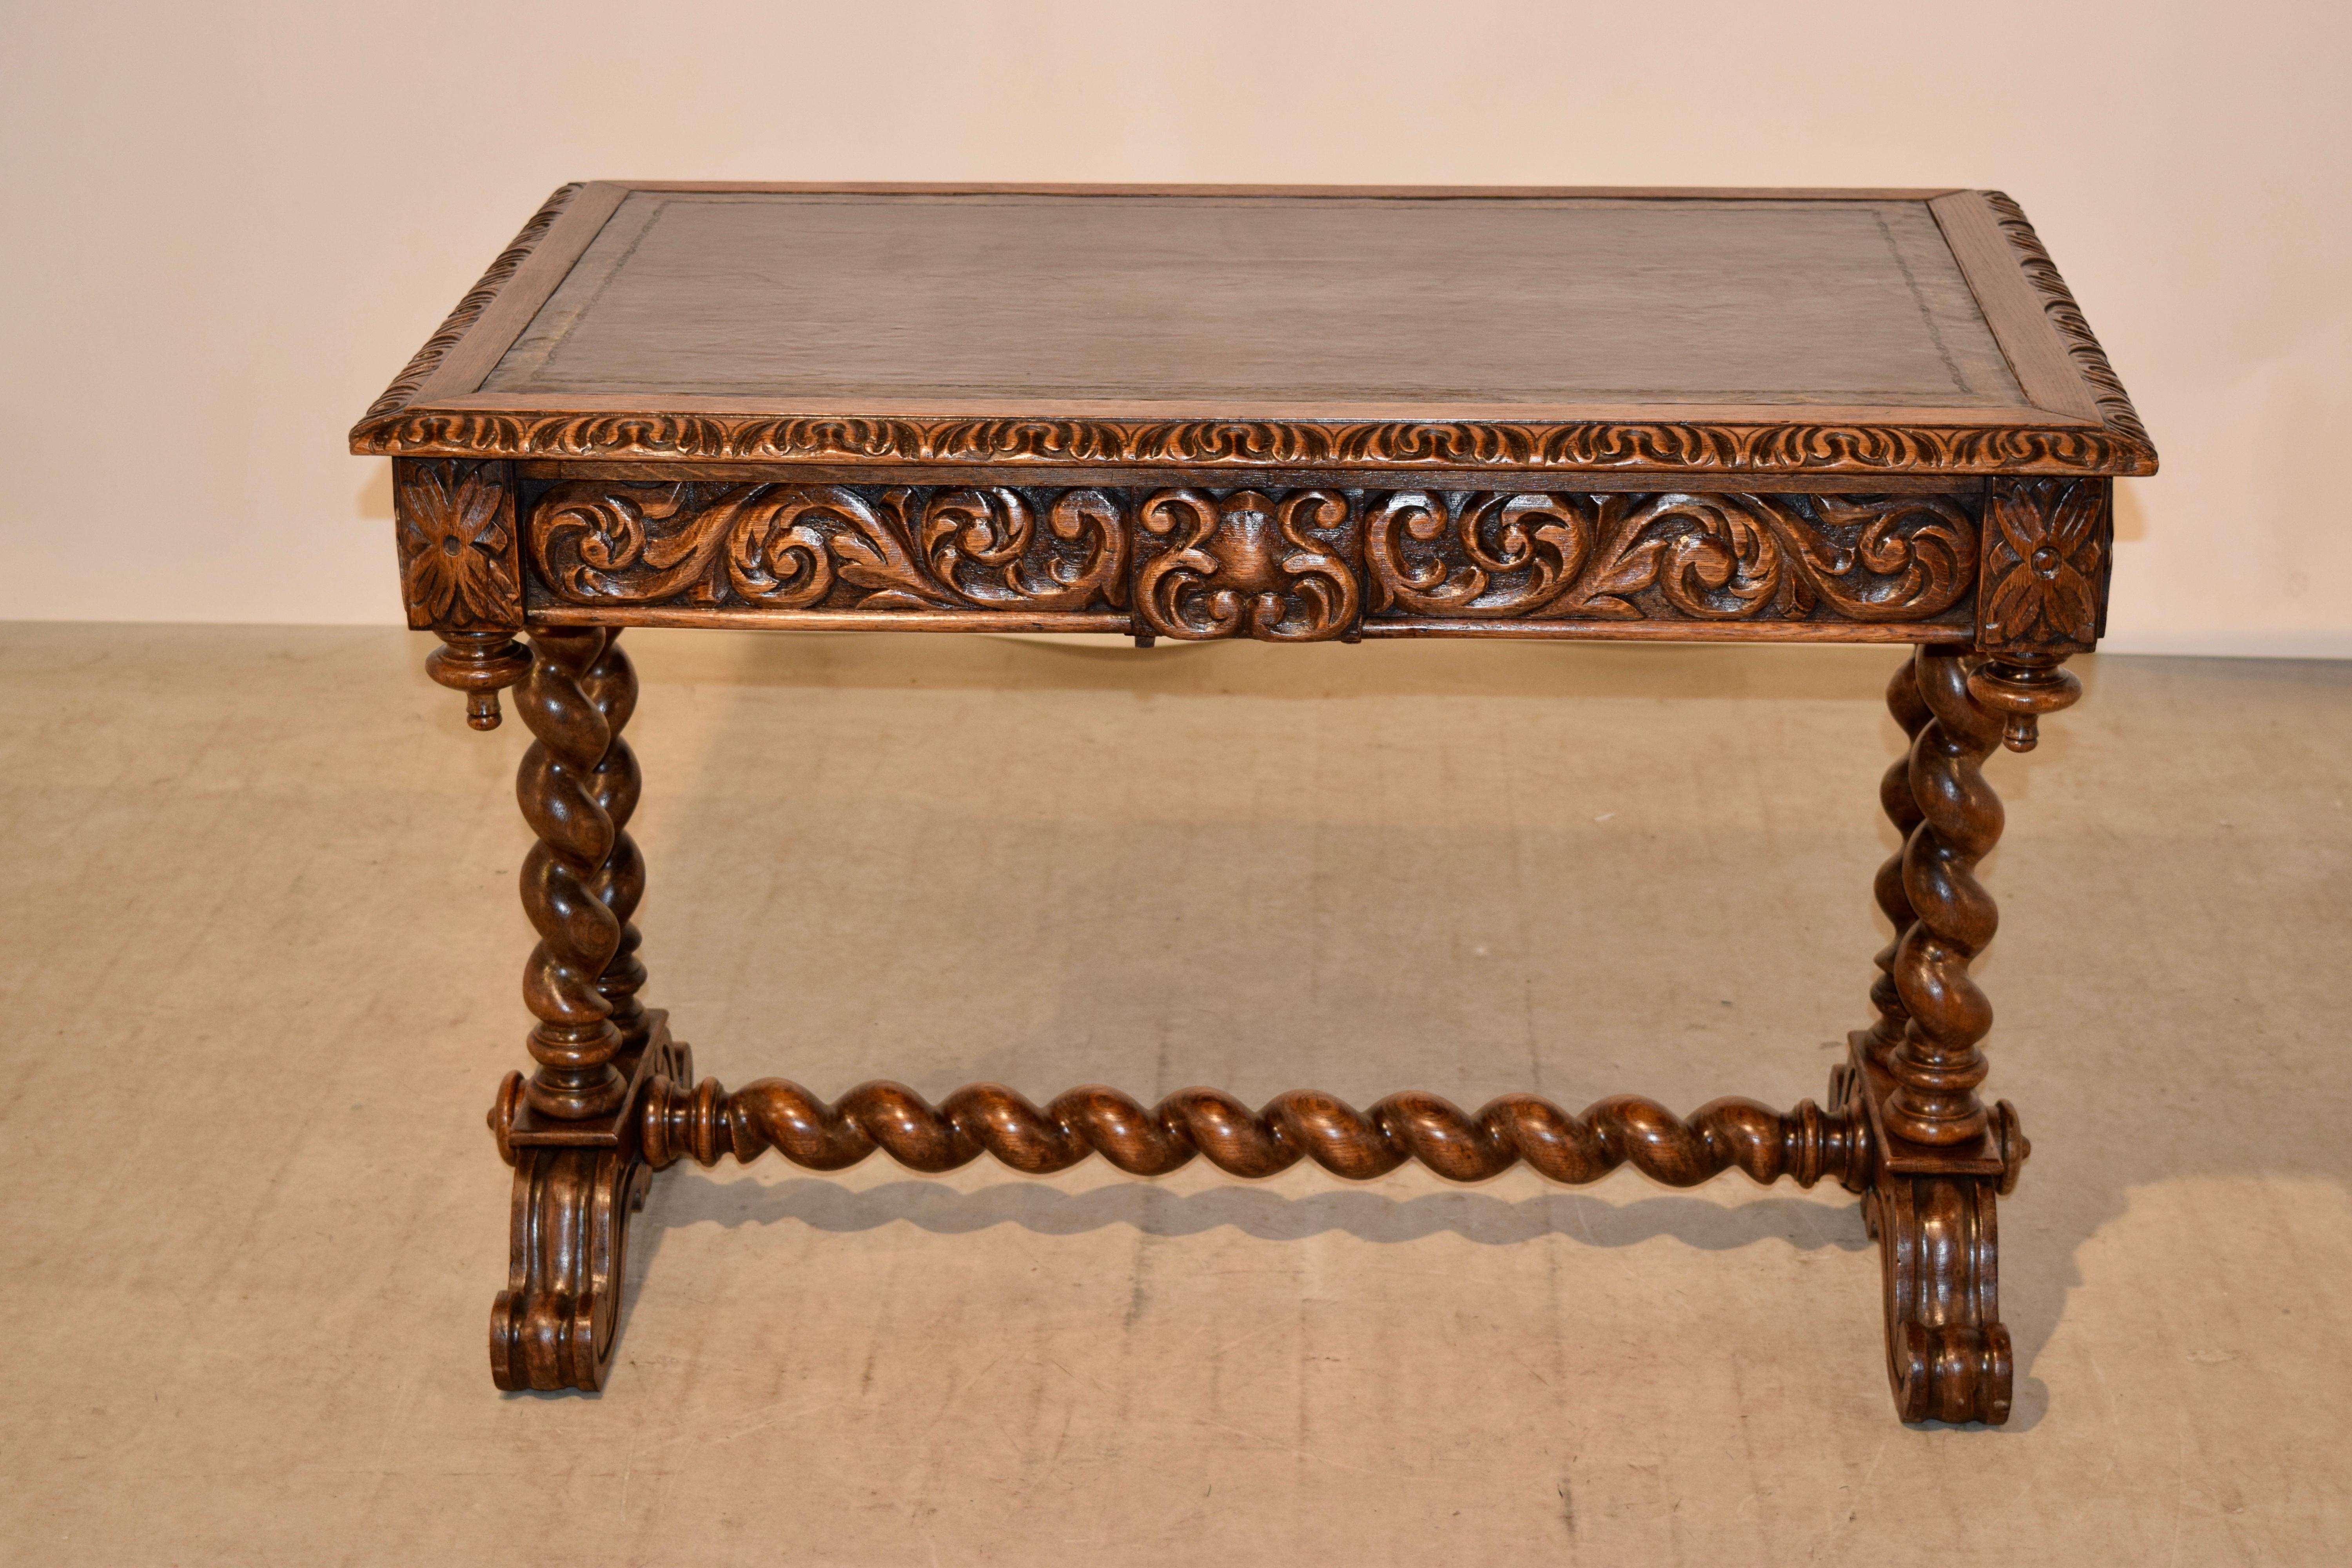 19th Century Carved Desk with Leather Top (19. Jahrhundert)